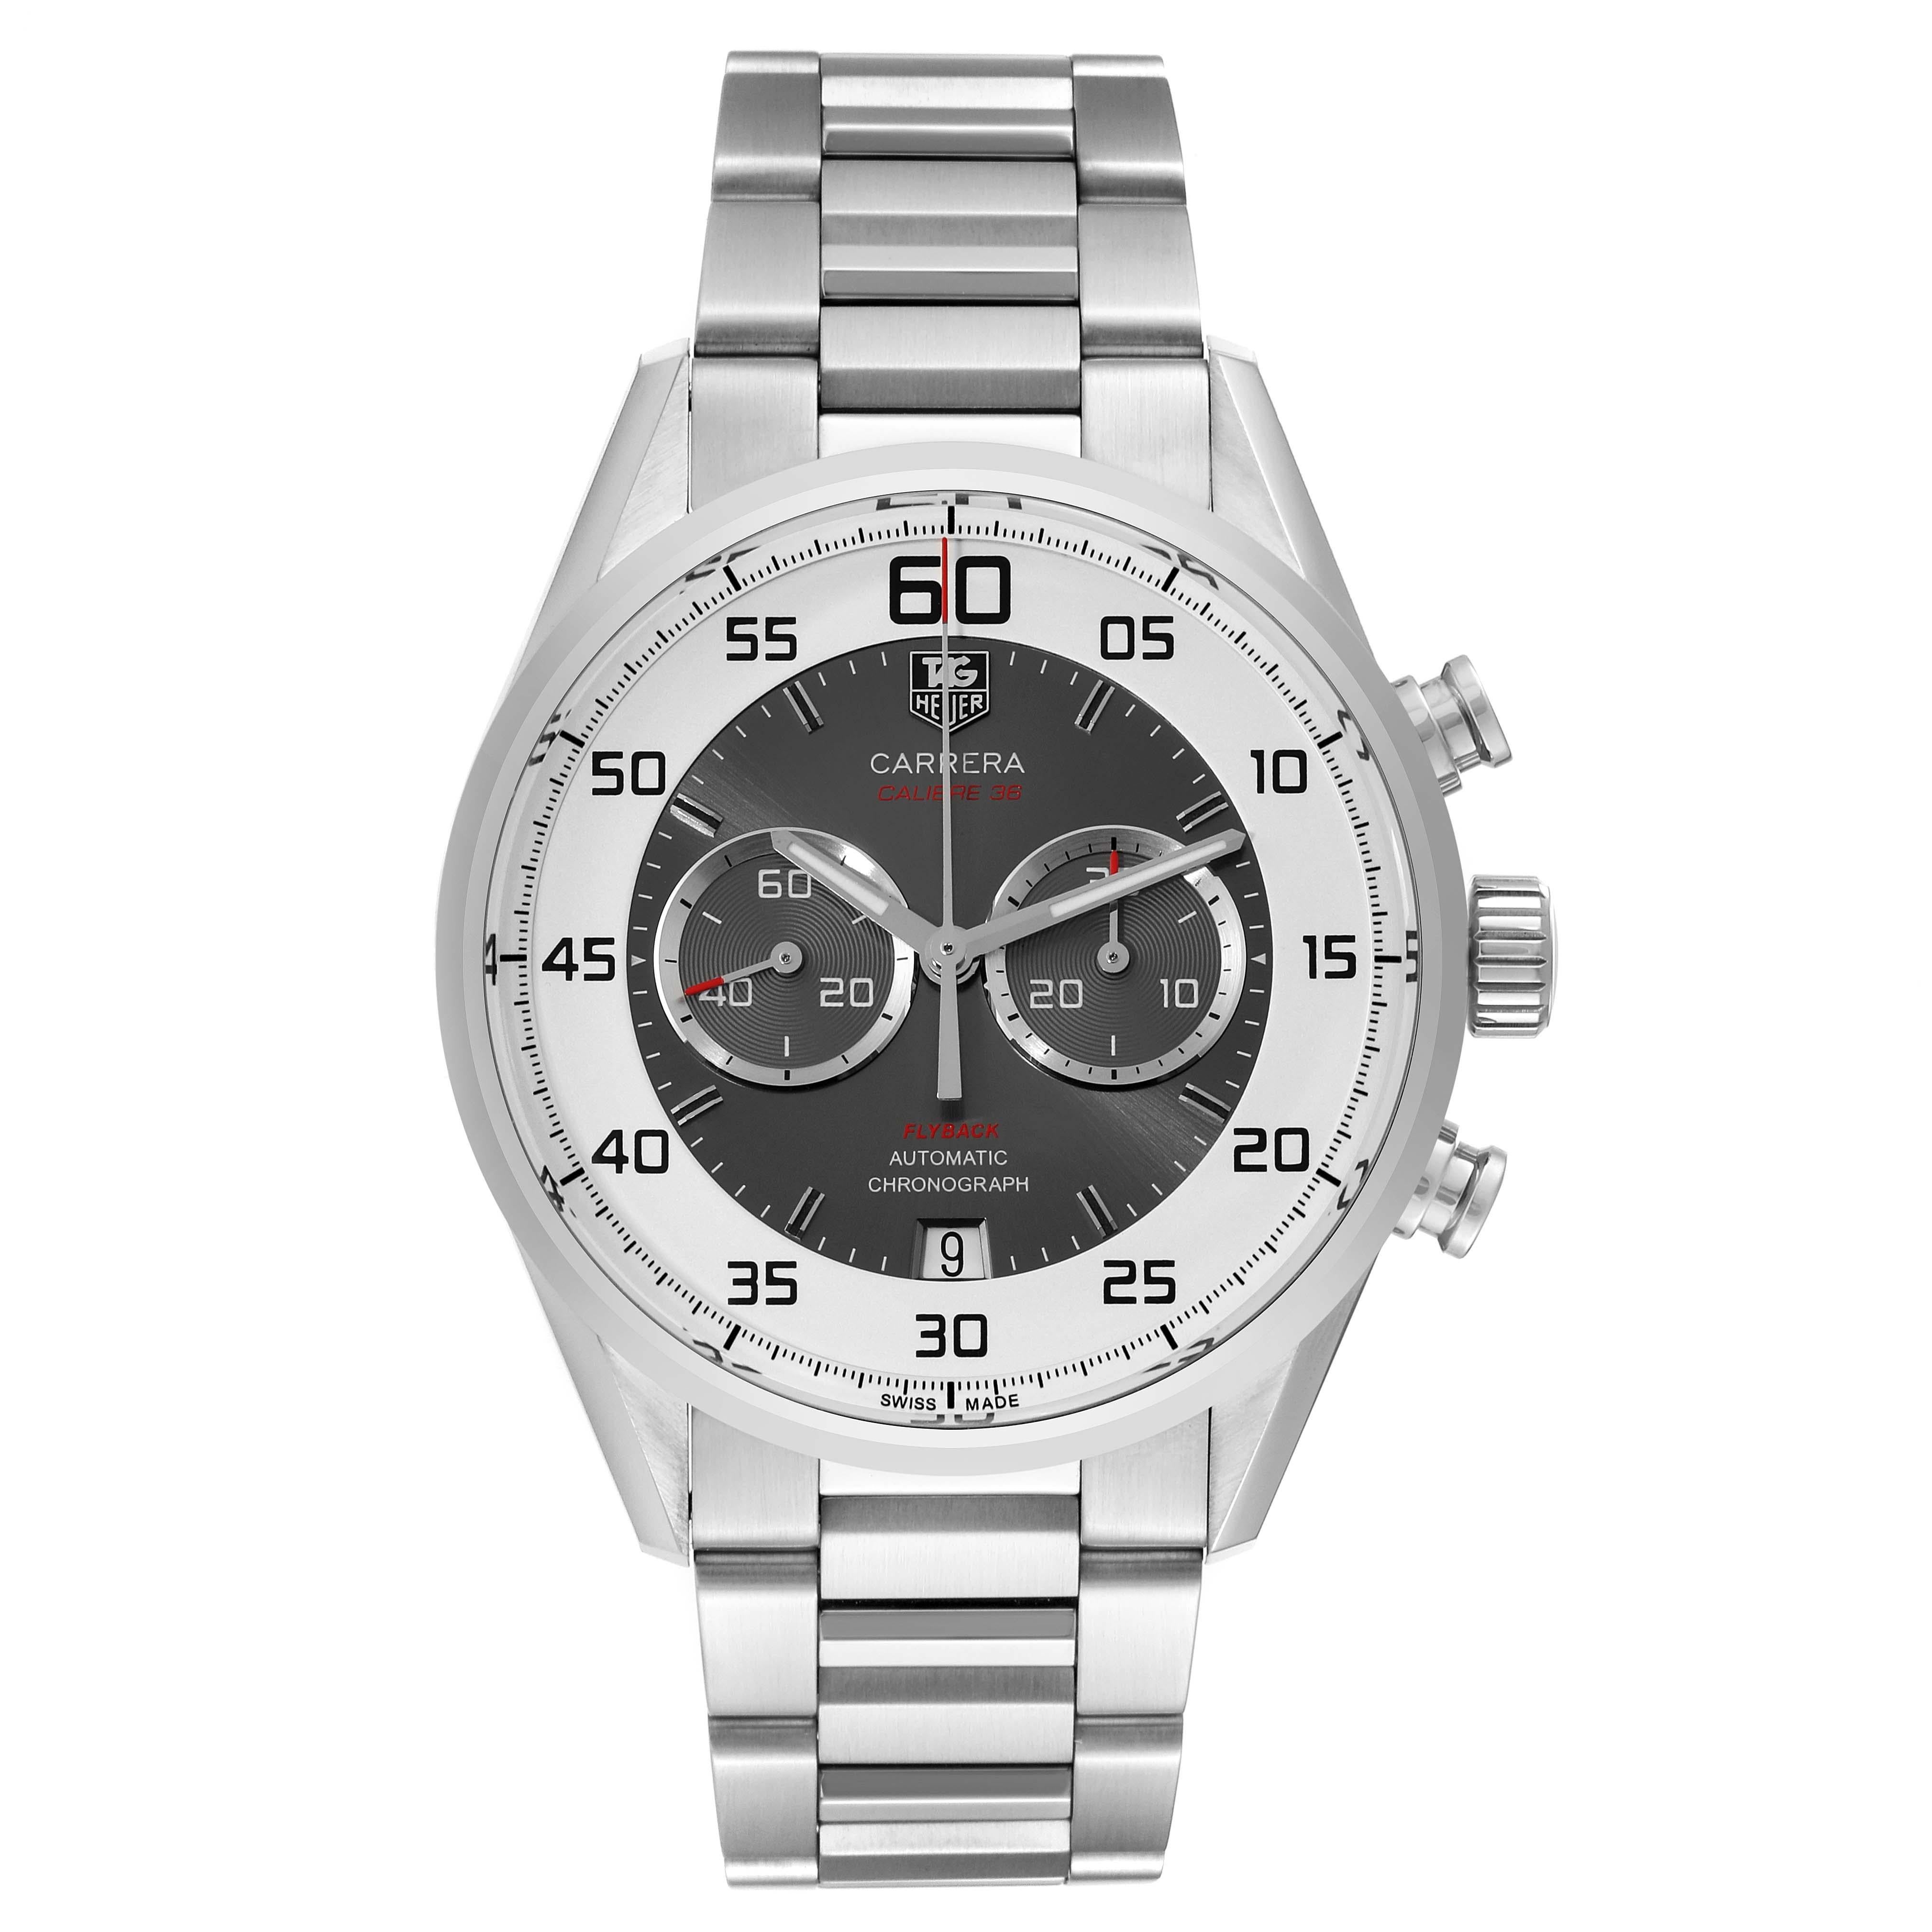 Tag Heuer Carrera Calibre 36 Flyback Steel Mens Watch CAR2B11 Box Card. Automatic self-winding movement. Stainless steel case 43.0 mm. Exhibition transparent sapphire crystal caseback. Stainless steel smooth bezel. Scratch resistant sapphire